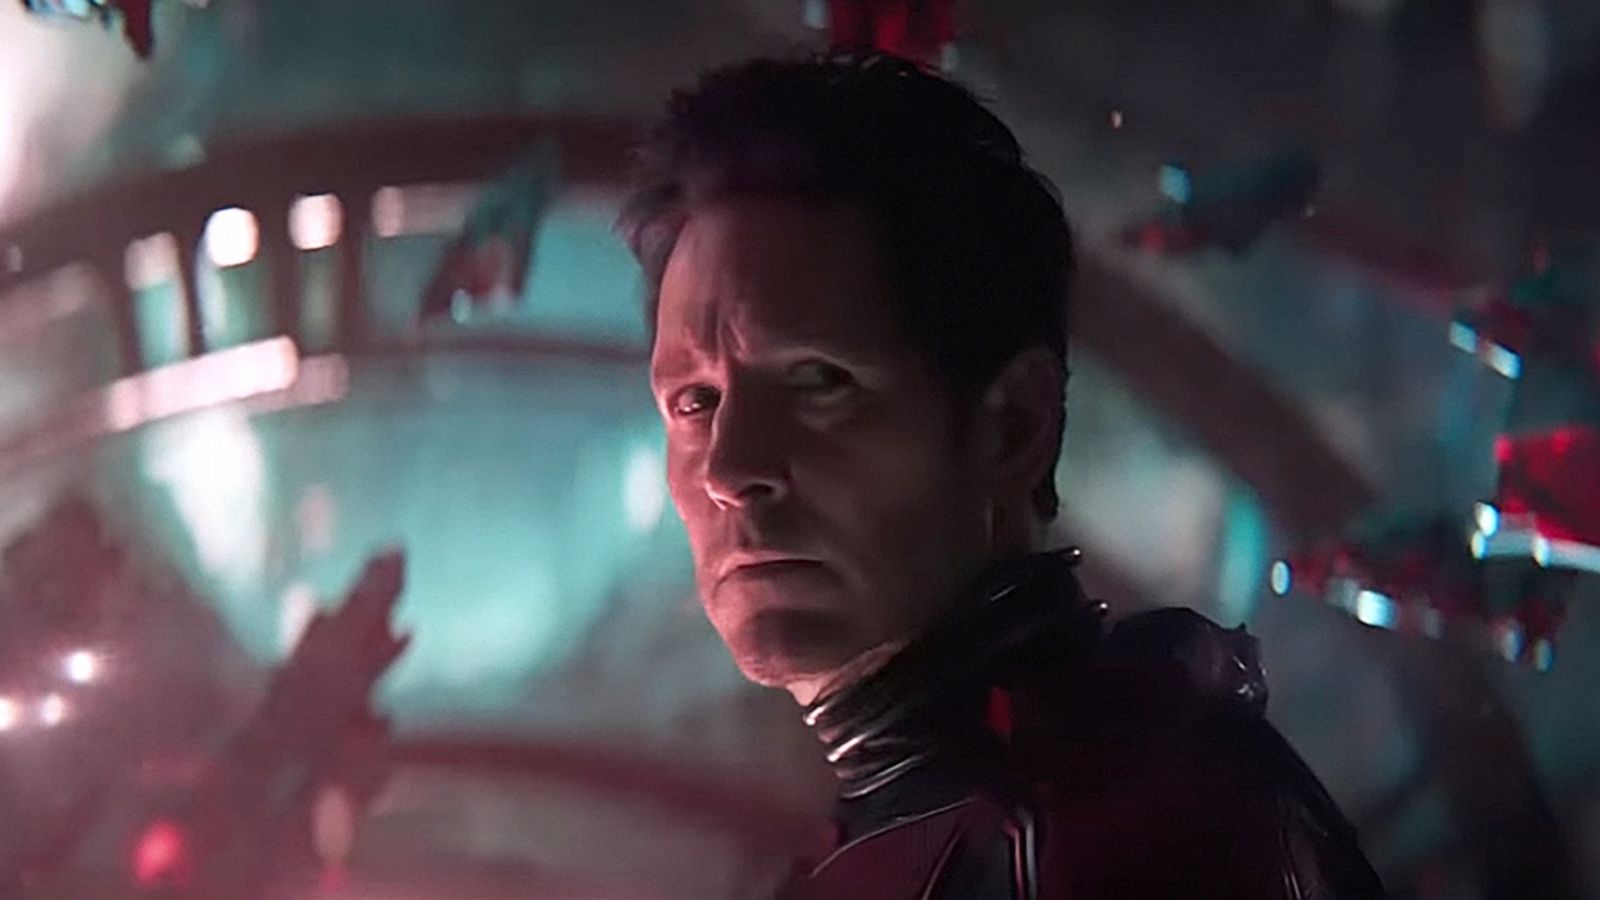 ANT-MAN & THE WASP Quantumania Teaser (2023) With Paul Rudd